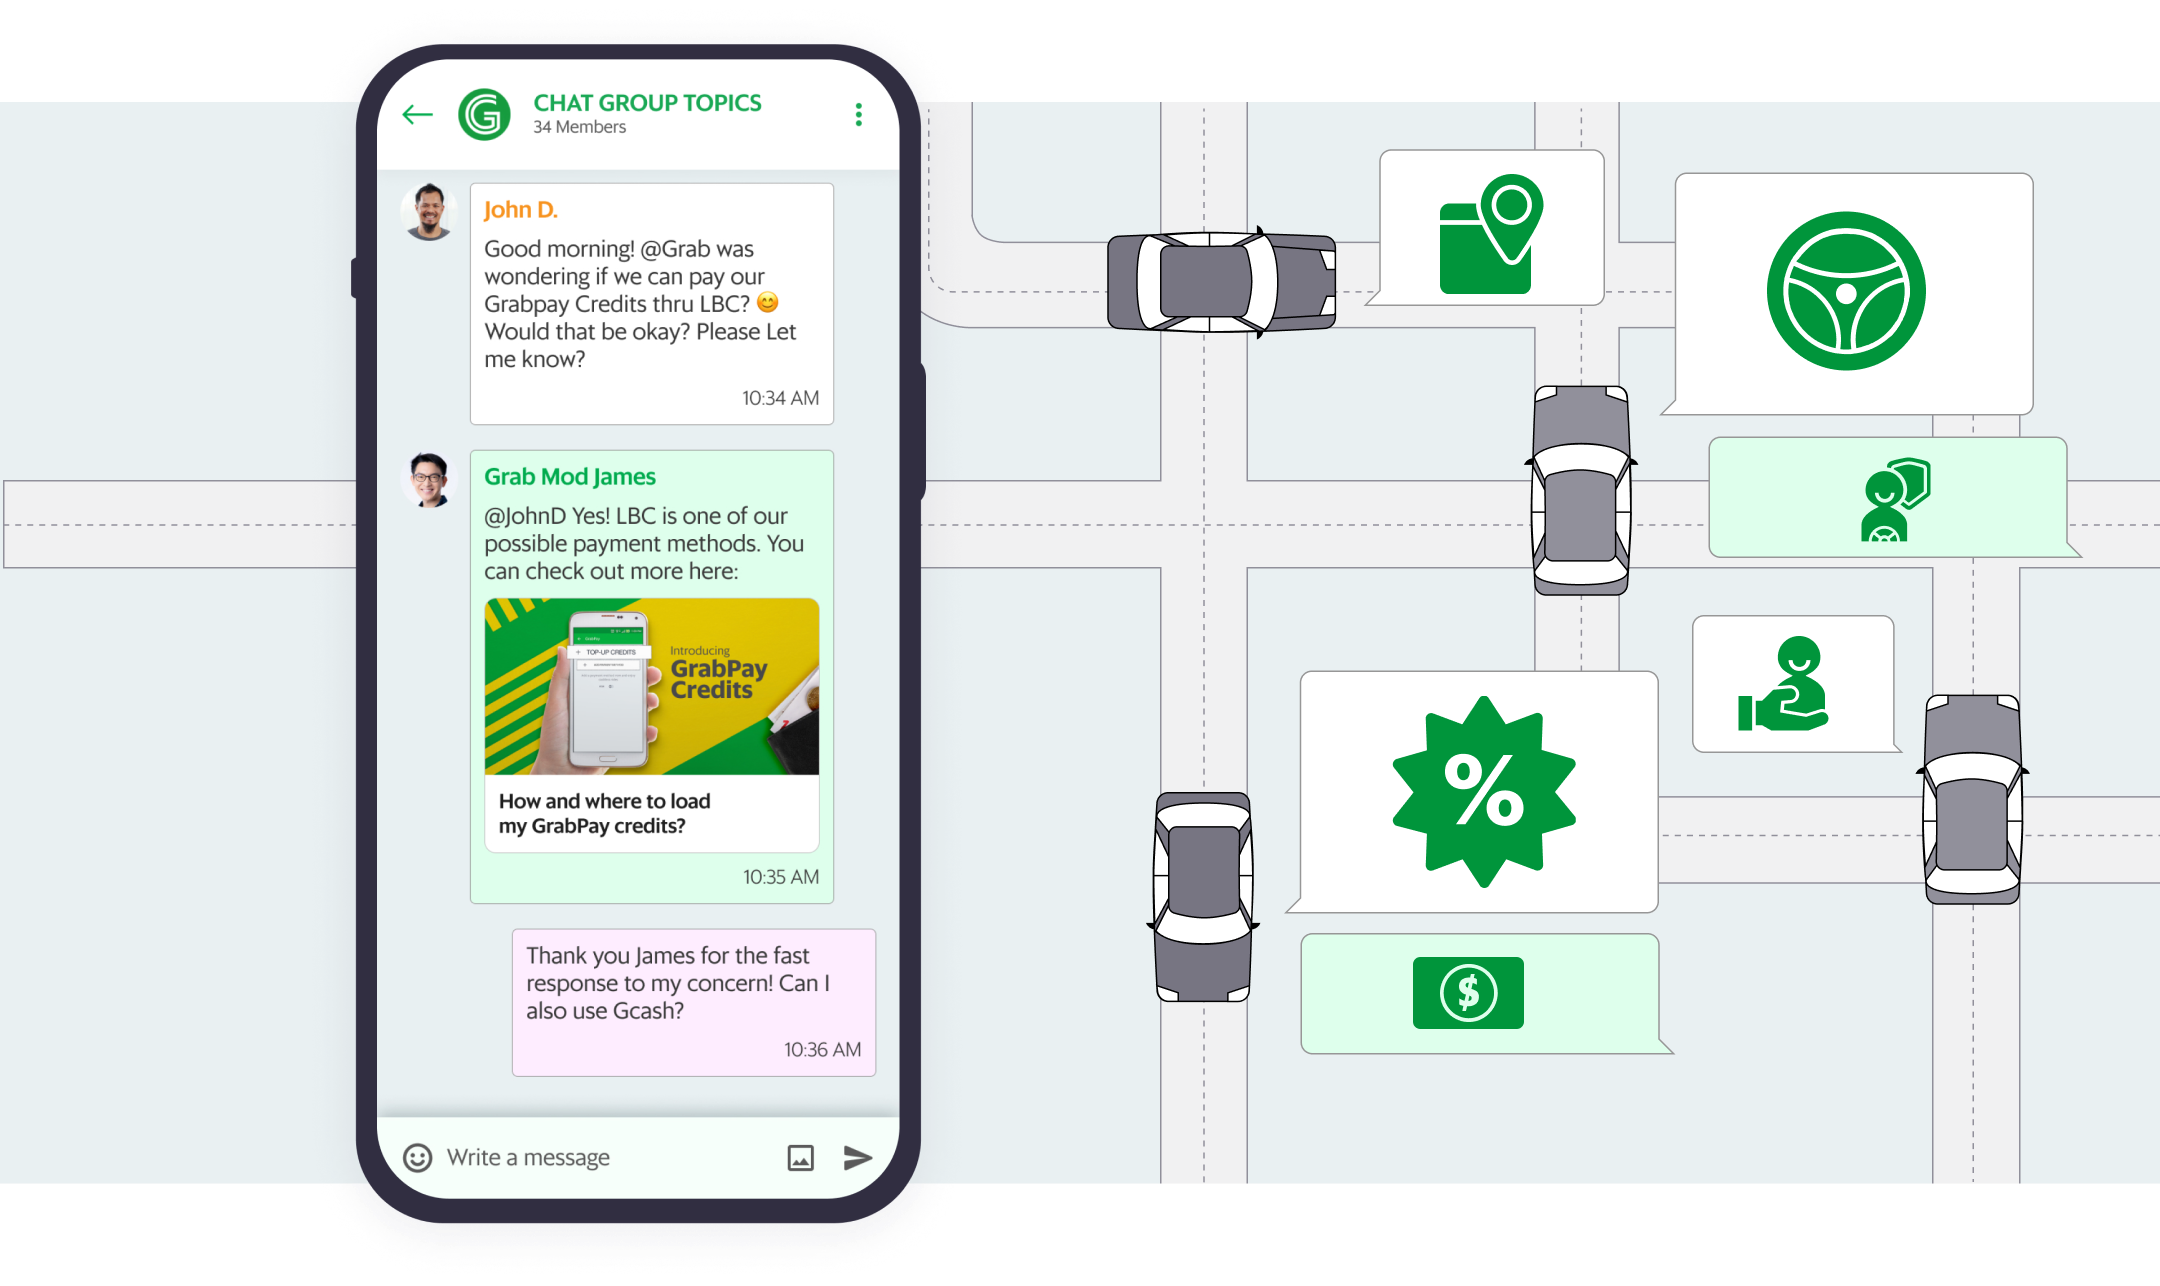 Grab Communities chat group messages, with a user asking on payment methods and a minimalistic background of roads and cars.